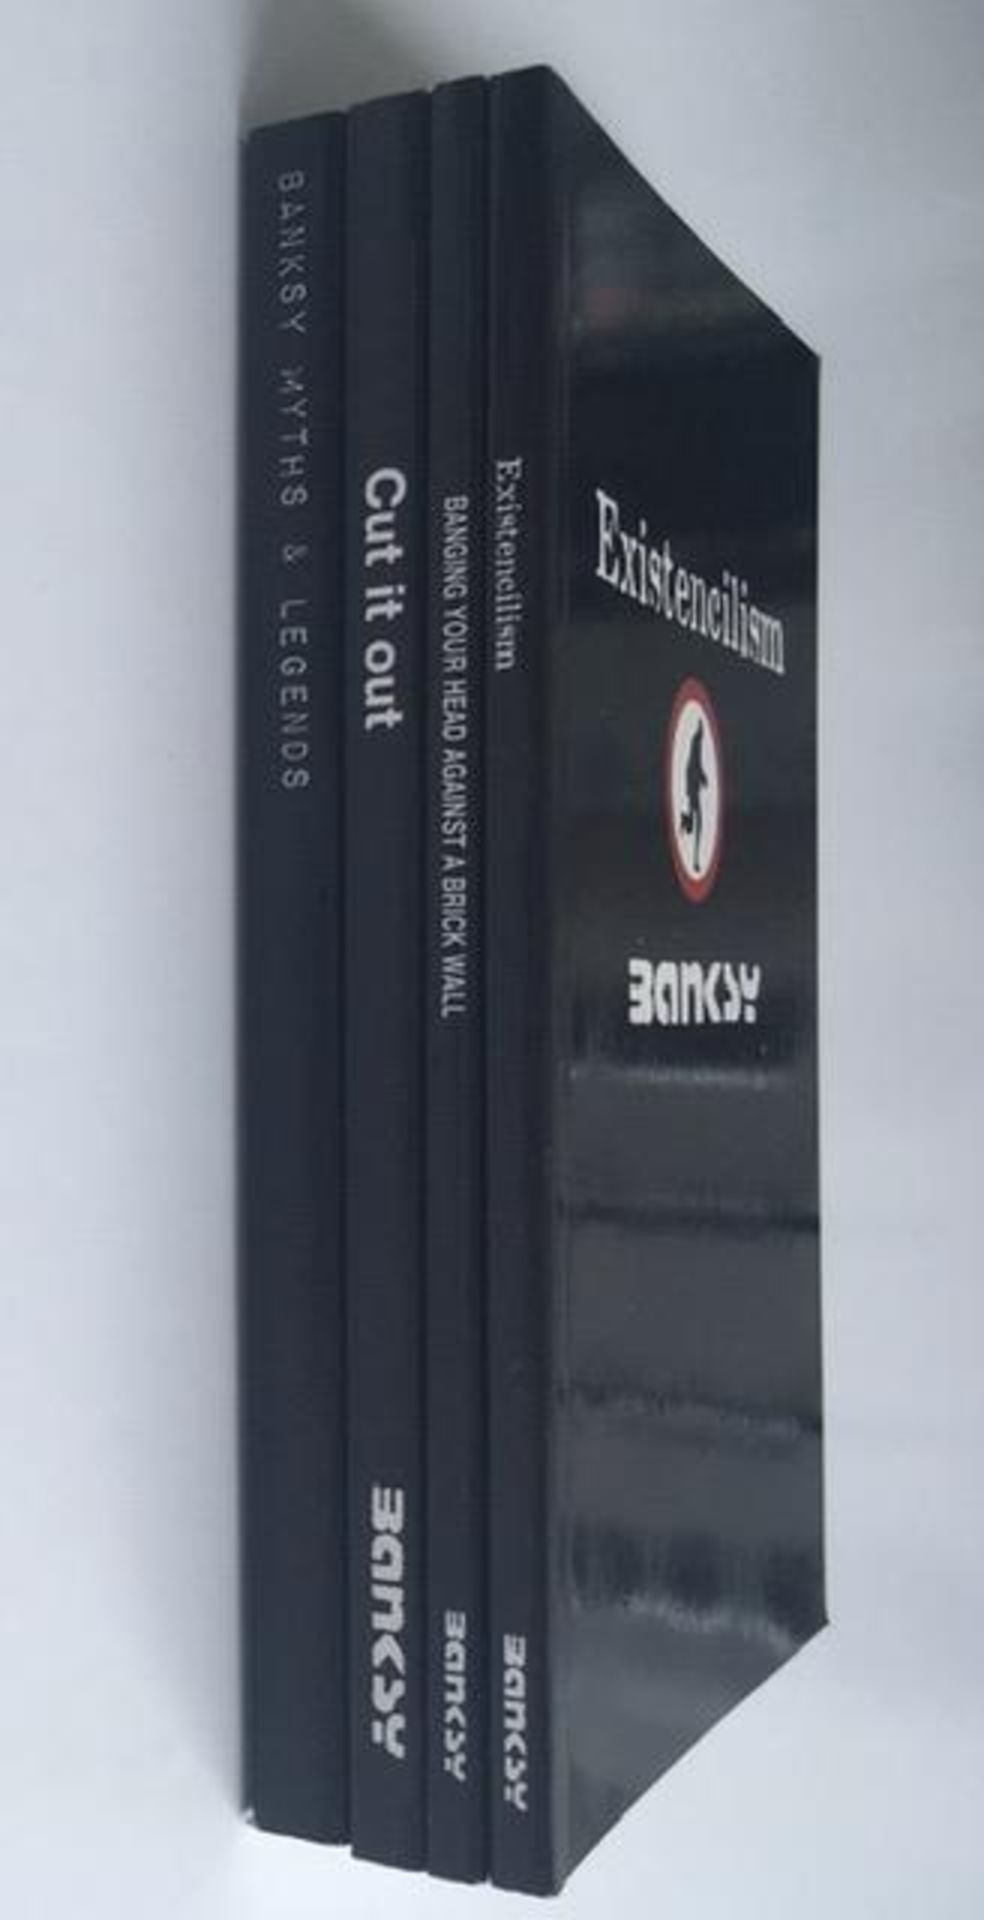 BANKSY Self-published books, Banging Your Head Against a Brick Wall, Existentialism, Cut it Out &m.. - Image 3 of 8